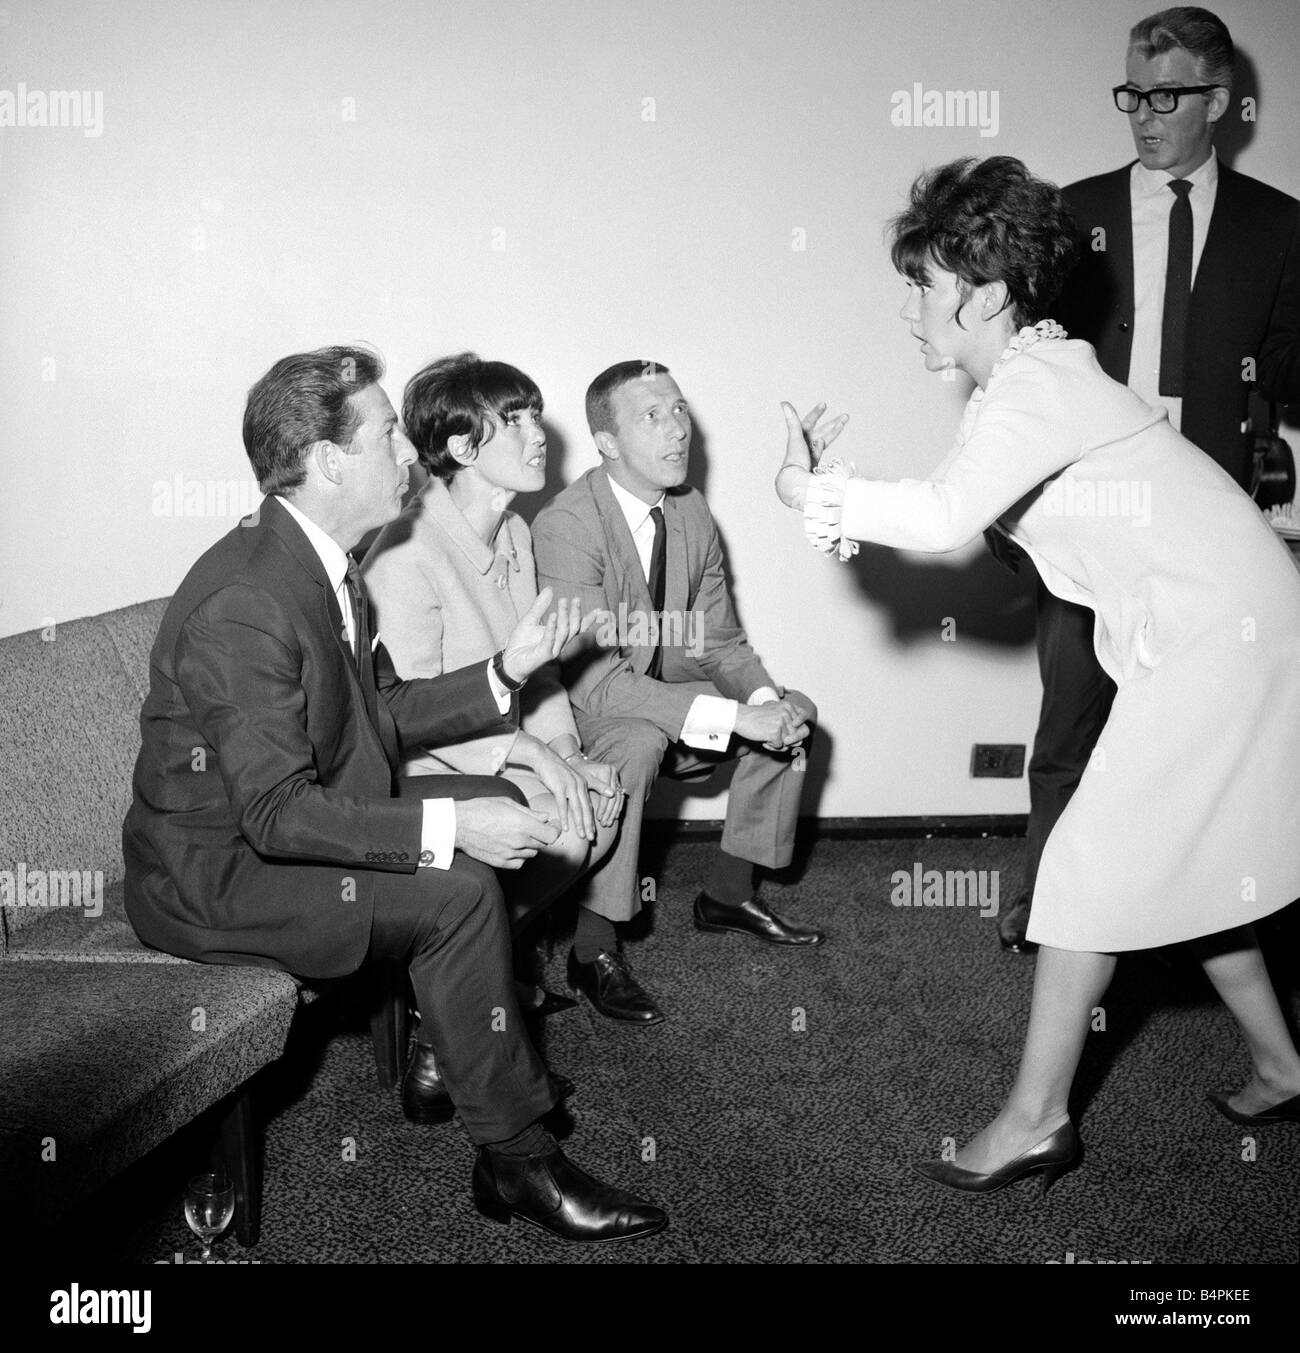 New Panel Game Don t Say a word Left to right Rehearsing Glenn mason Una Stubbs Harry Fowler with Amanda Barrie miming being watched by compere Ronan O Casey 1963 Stock Photo